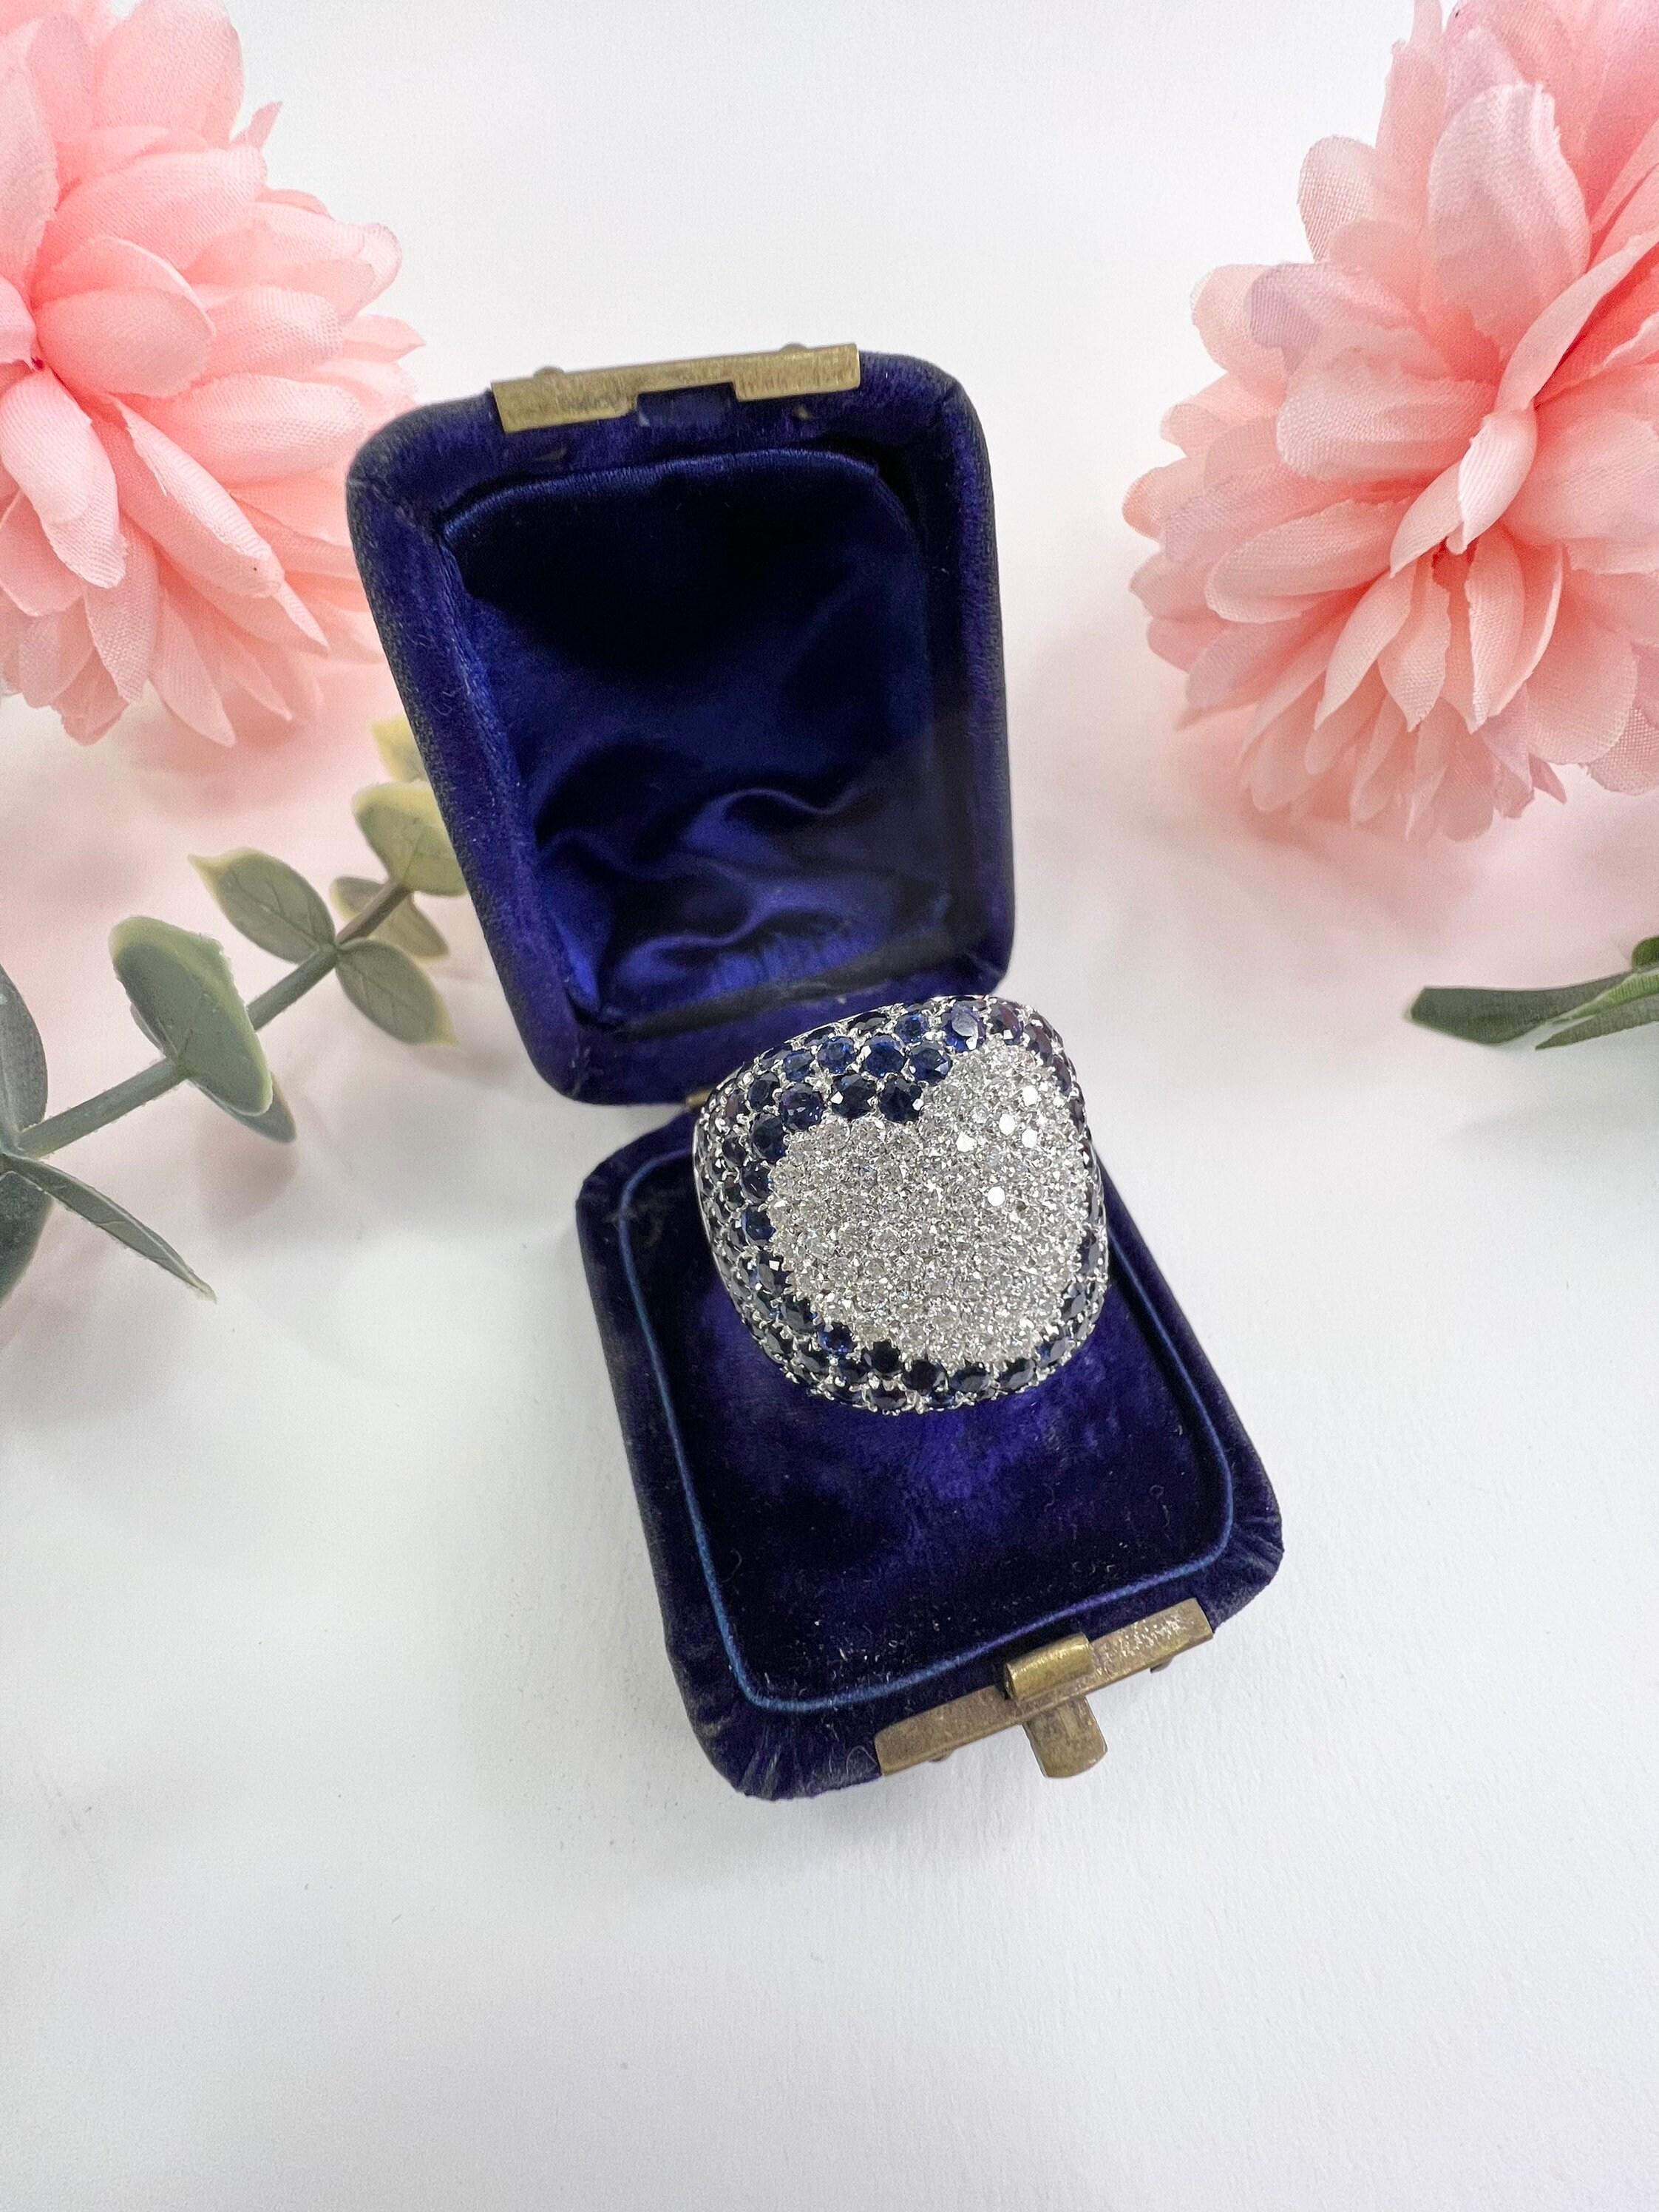 Sapphire & Diamond Heart Ring

18ct White Gold 

French Stamped 750 with Paris Owl 75 Hallmark

Circa 1980’s

Makers Mark P B 

Beautiful, Vintage White Gold Sapphire & Diamond Heart Ring By Italian Designer Pasquale Bruni.
This Fabulous Pavé Ring